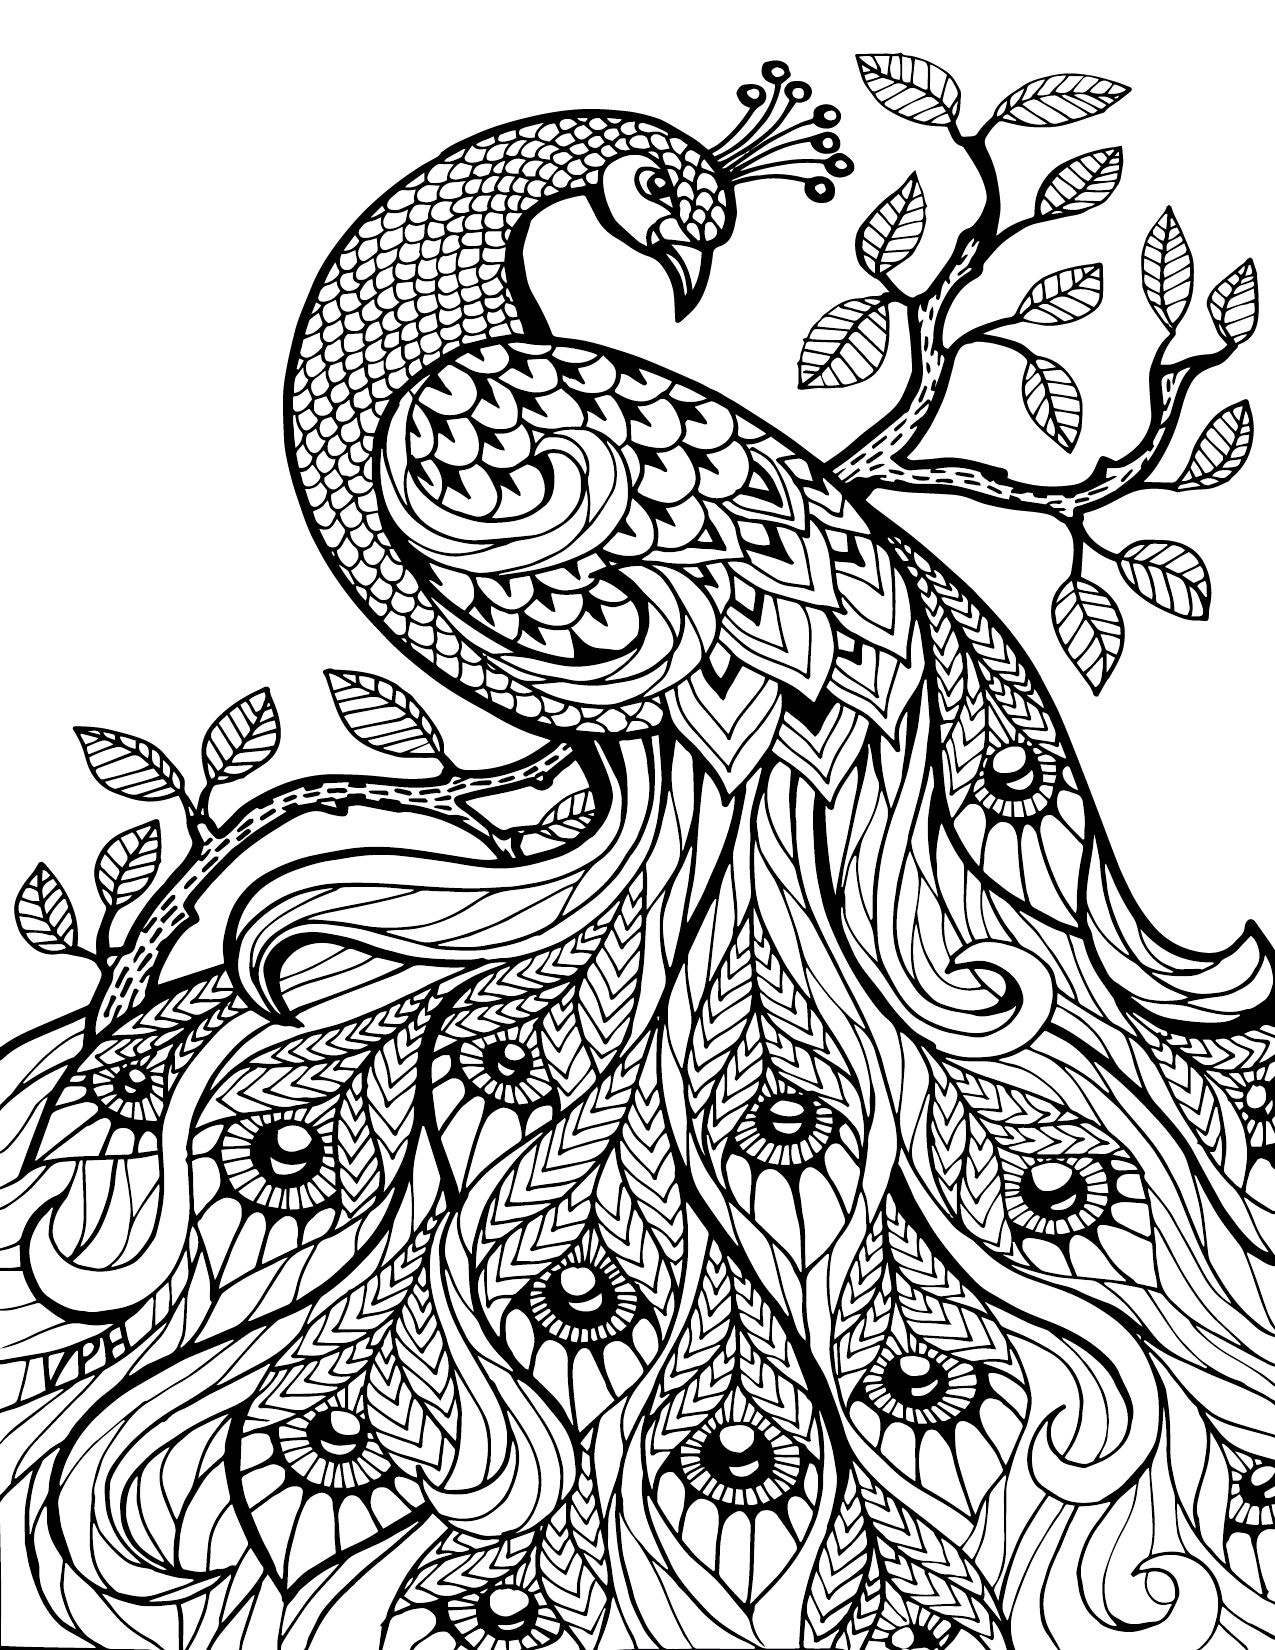 Free Printable Coloring Pages For Adults Only Image 36 Art - Free Printable Coloring Pages For Adults